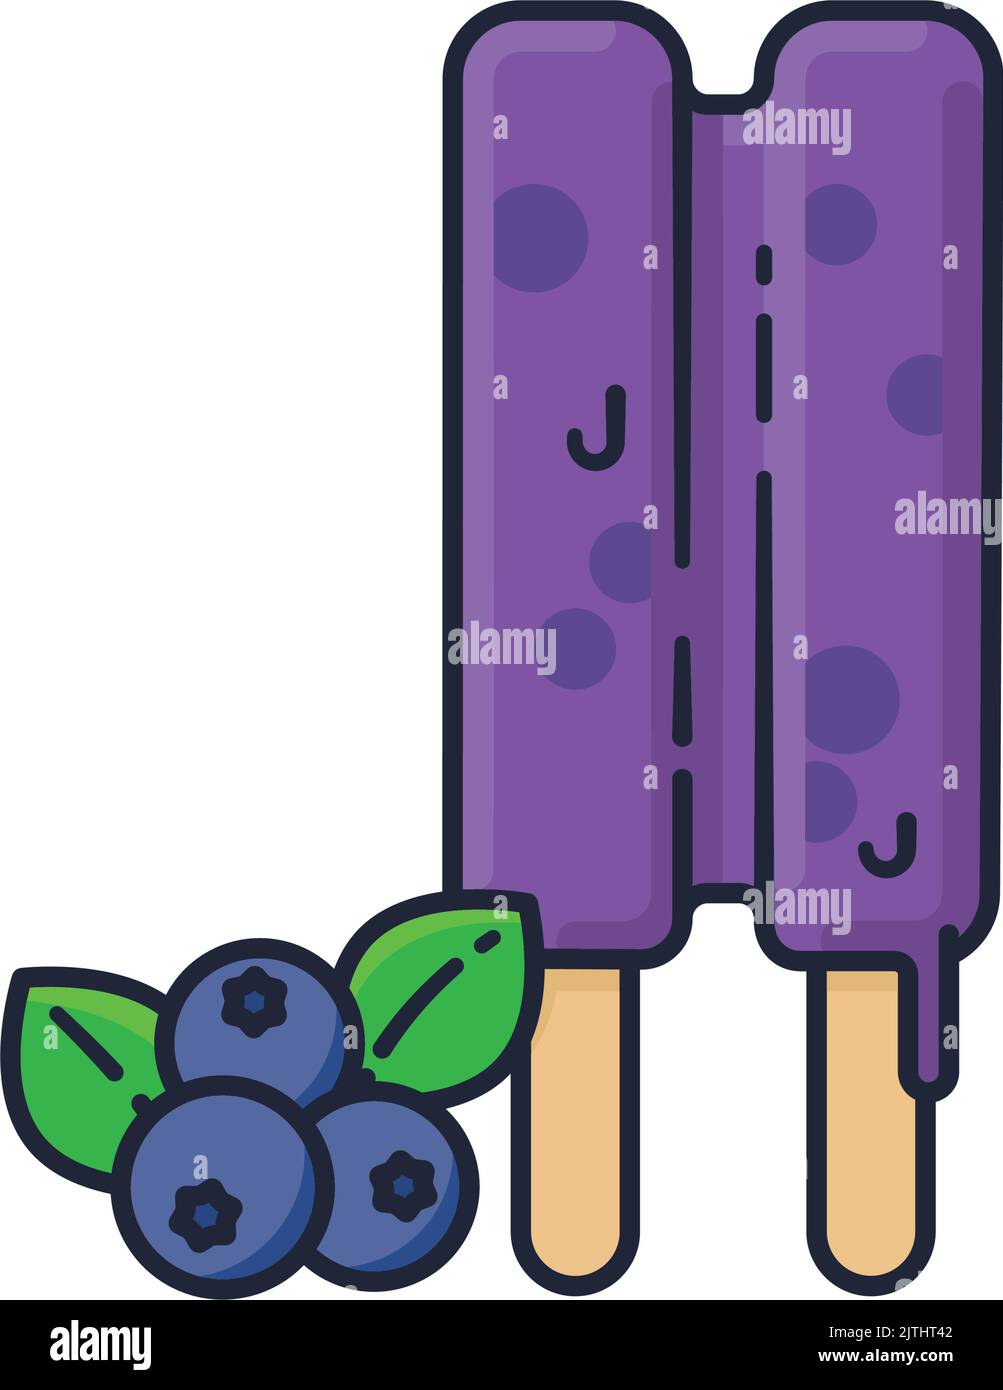 Blueberry popsicle and blueberries filled outline style isolated vector illustration for Blueberry Popsicle Day on September 2nd Stock Vector